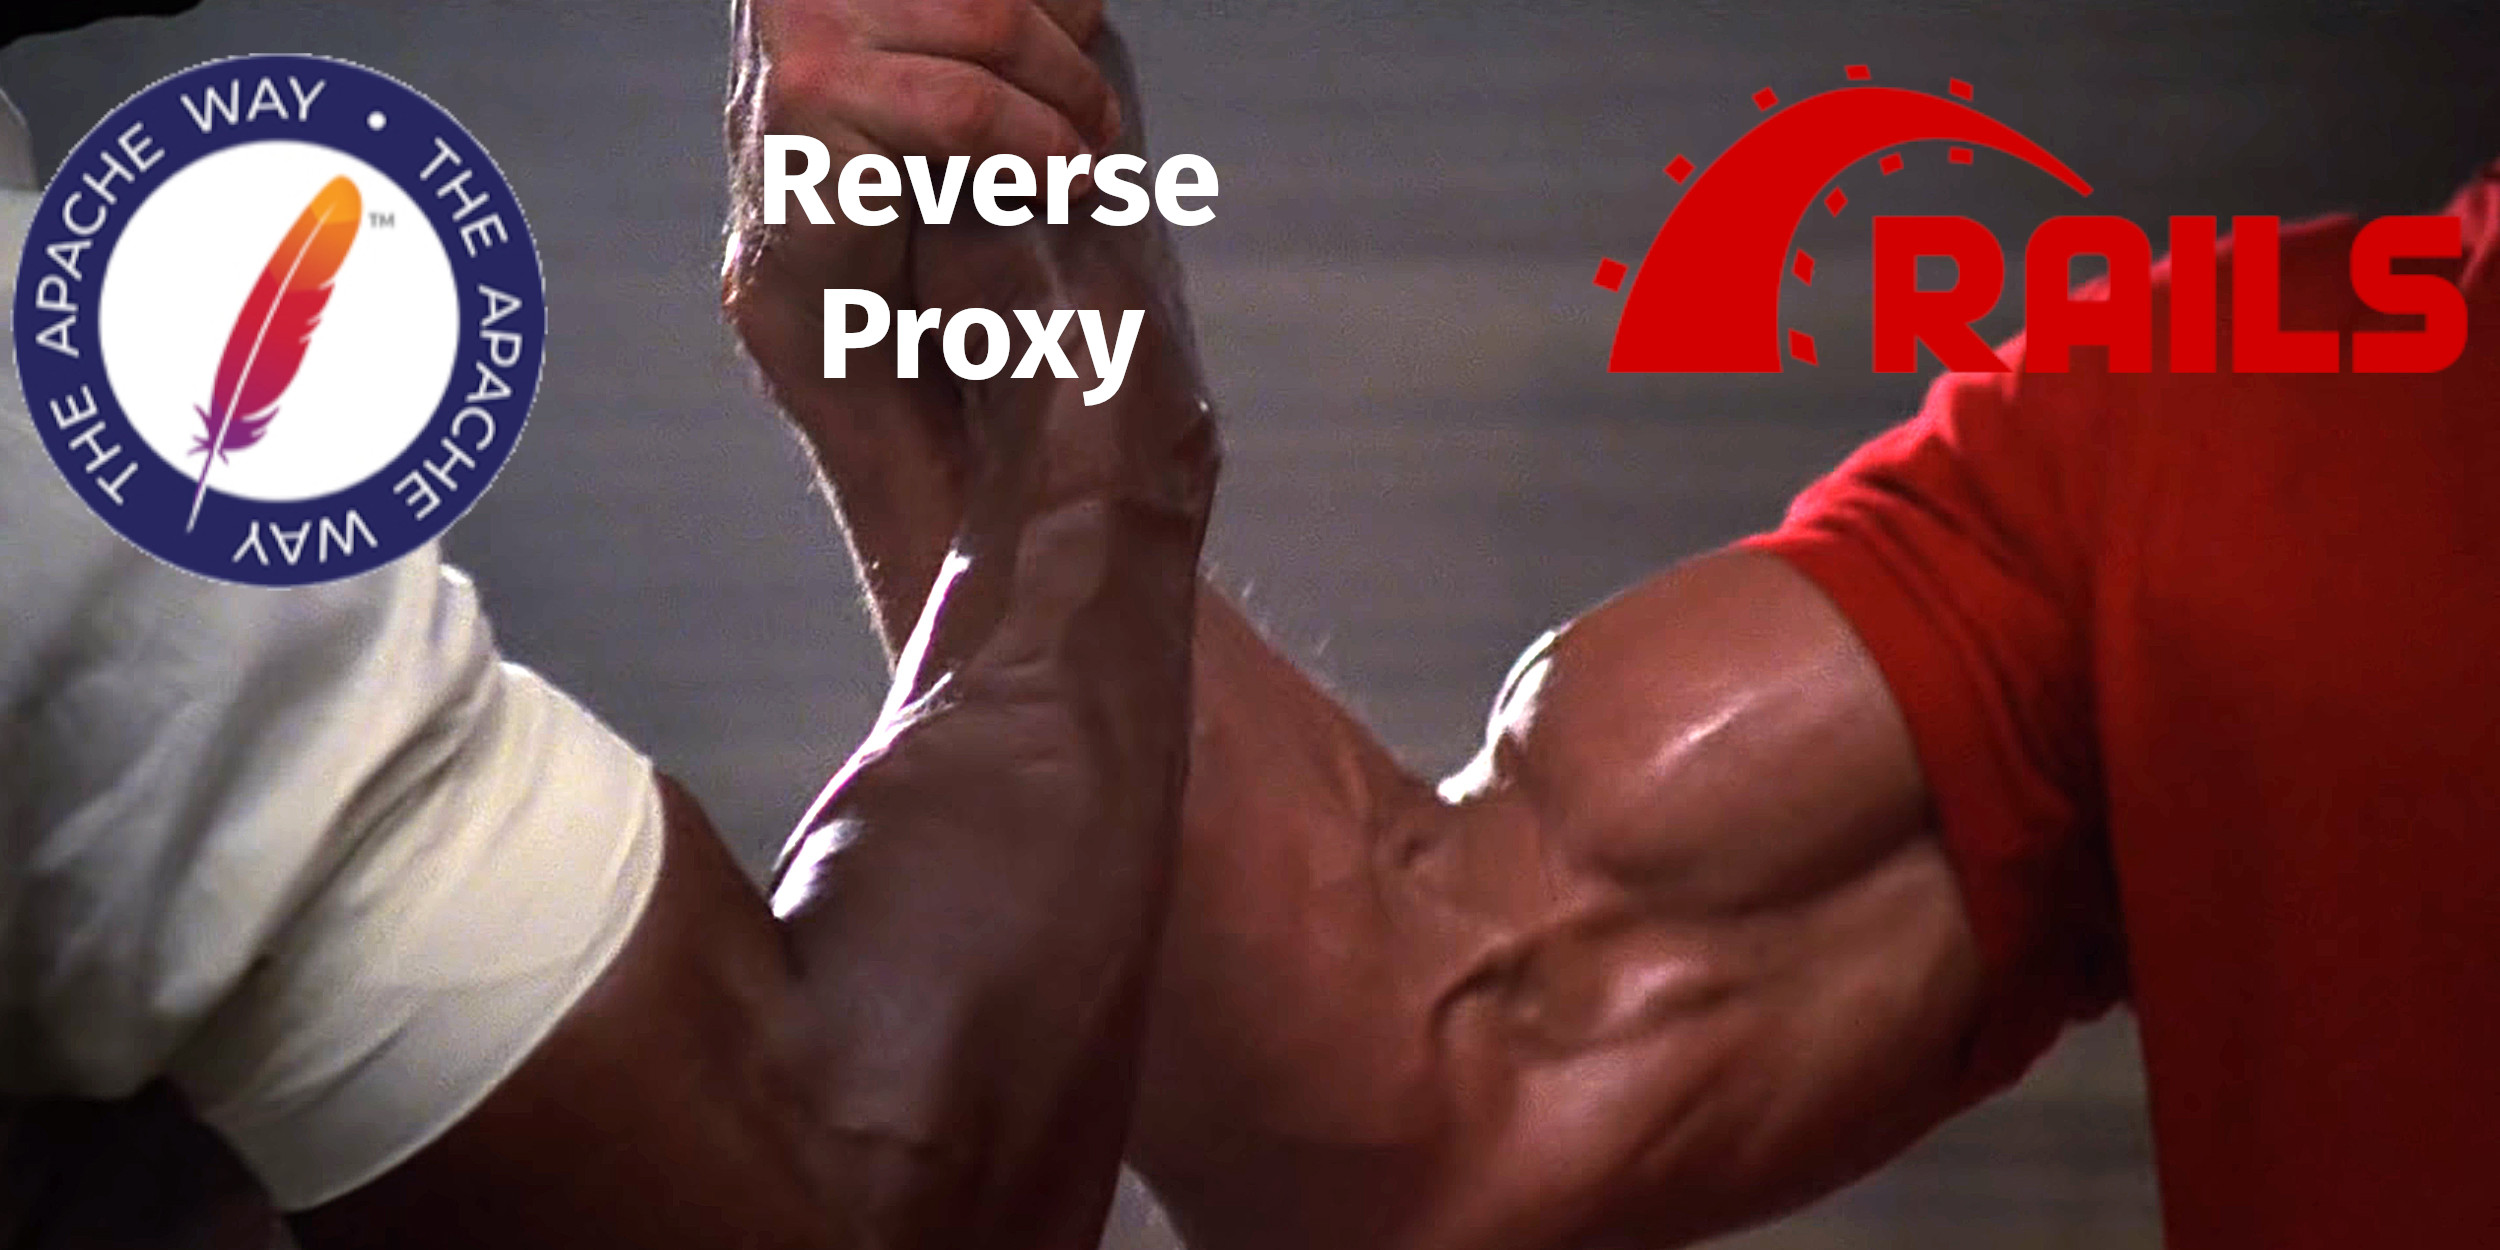 Meme representing Apache HTTPD and Rails working together via reverse proxy.